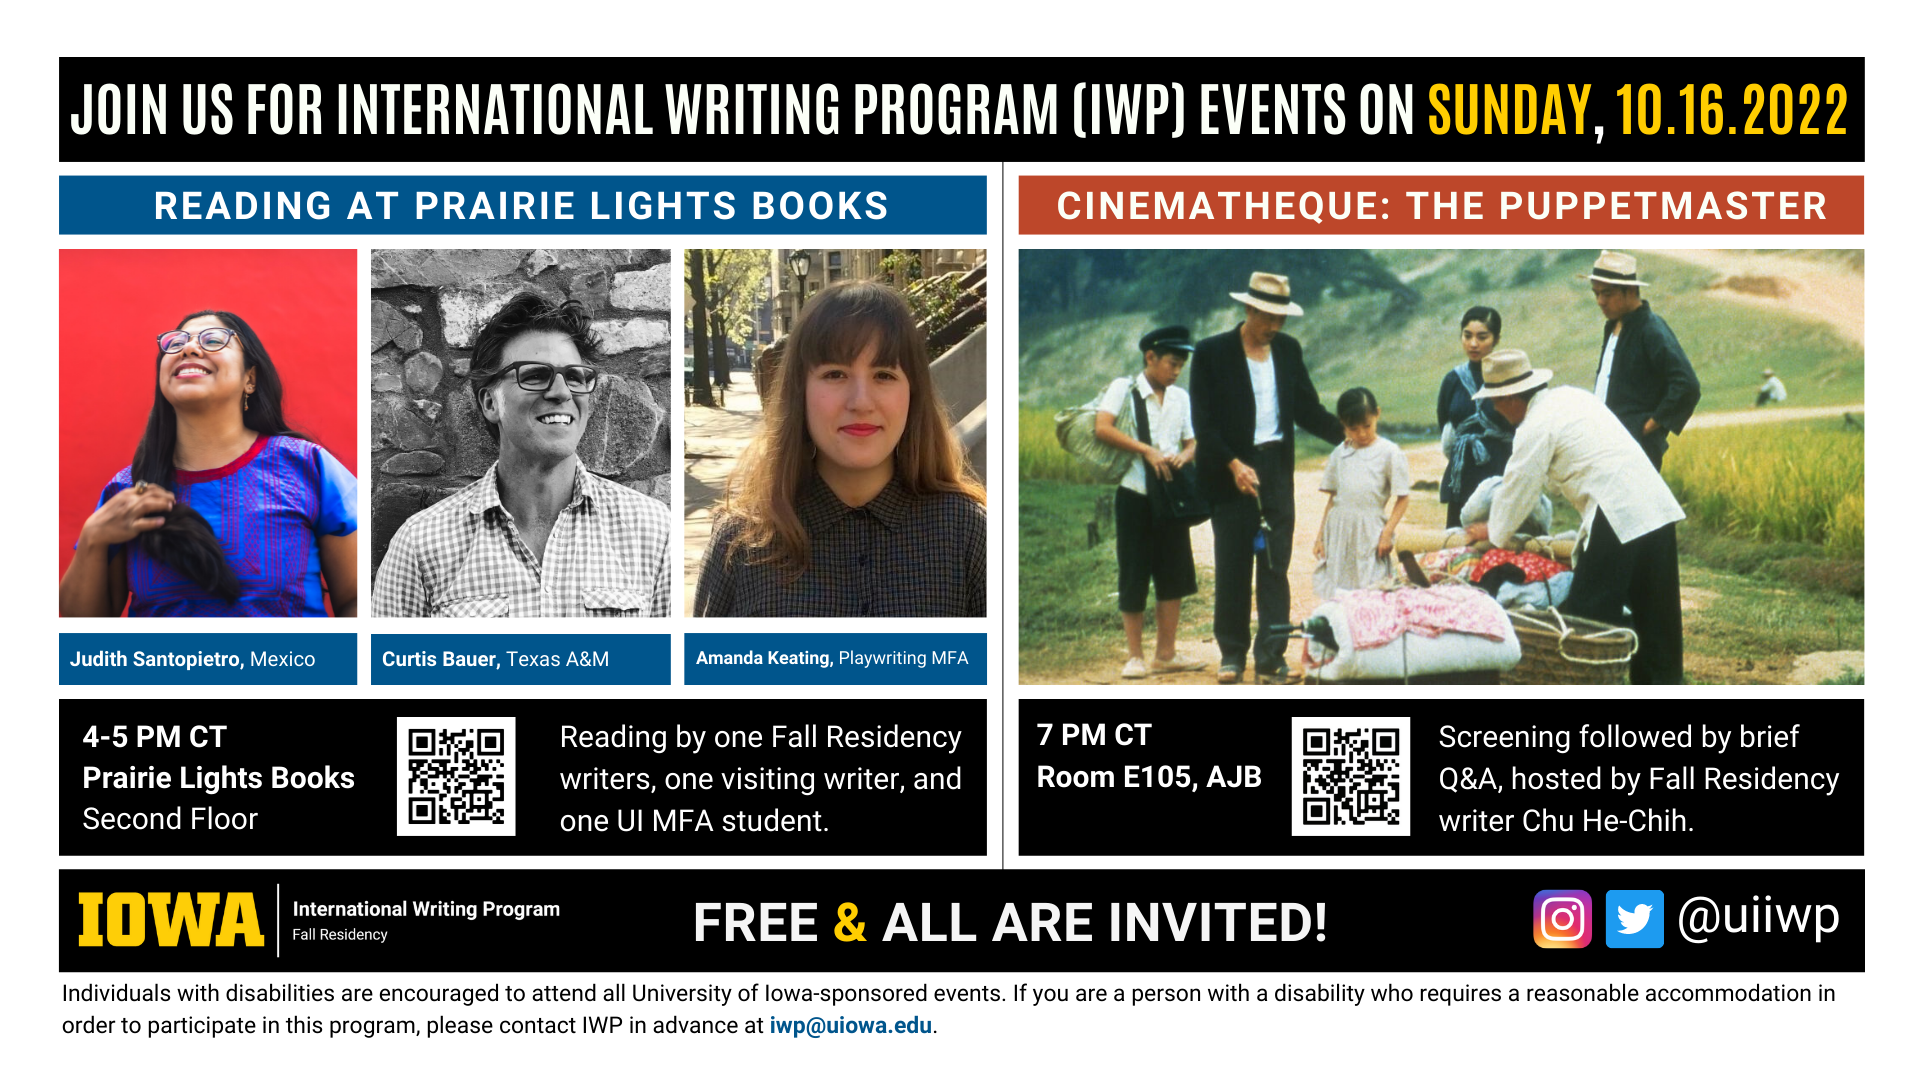 Sunday, 10/16 Image: An image with two halves, each advertising one event. The image as a whole is labeled "Join us for International Writing Program (IWP) Events on Sunday, 10.16.2022. The left half left of the image is labeled "Reading at Prairie Lights Books." There are portraits of three writers (named below) and the following text: "Judith Santopietro, Mexico, Curtis Bauer, Texas A&M. Amanda Keating, Playwriting MFA." 4-5 PM CT Prairie Lights Books, Second Floor. Reading by one Fall Residency writer, one visiting writer, and one UI MFA student." The right half of the image is labeled "Cinematheque: The Puppetmaster. Below that heading there is a screenshot from the film, featuring several people in a Taiwanese countryside examining a bundle of colorful textiles. The following text appears below: "7 PM CT, Room E105 AJB. Screening followed by brief Q&A, hosted by Fall Residency writer Chu He-Chih." Below that text there are the IWP Fall Residency logo, the Instagram and Twitter handle @uiiwp, and a note that the event is “Free & All Are Invited.” The following text is at the bottom of the image: "Individuals with disabilities are encouraged to attend all University of Iowa-sponsored events. If you are a person with a disability who requires a reasonable accommodation in order to participate in this program, please contact IWP in advance at iwp@uiowa.edu."